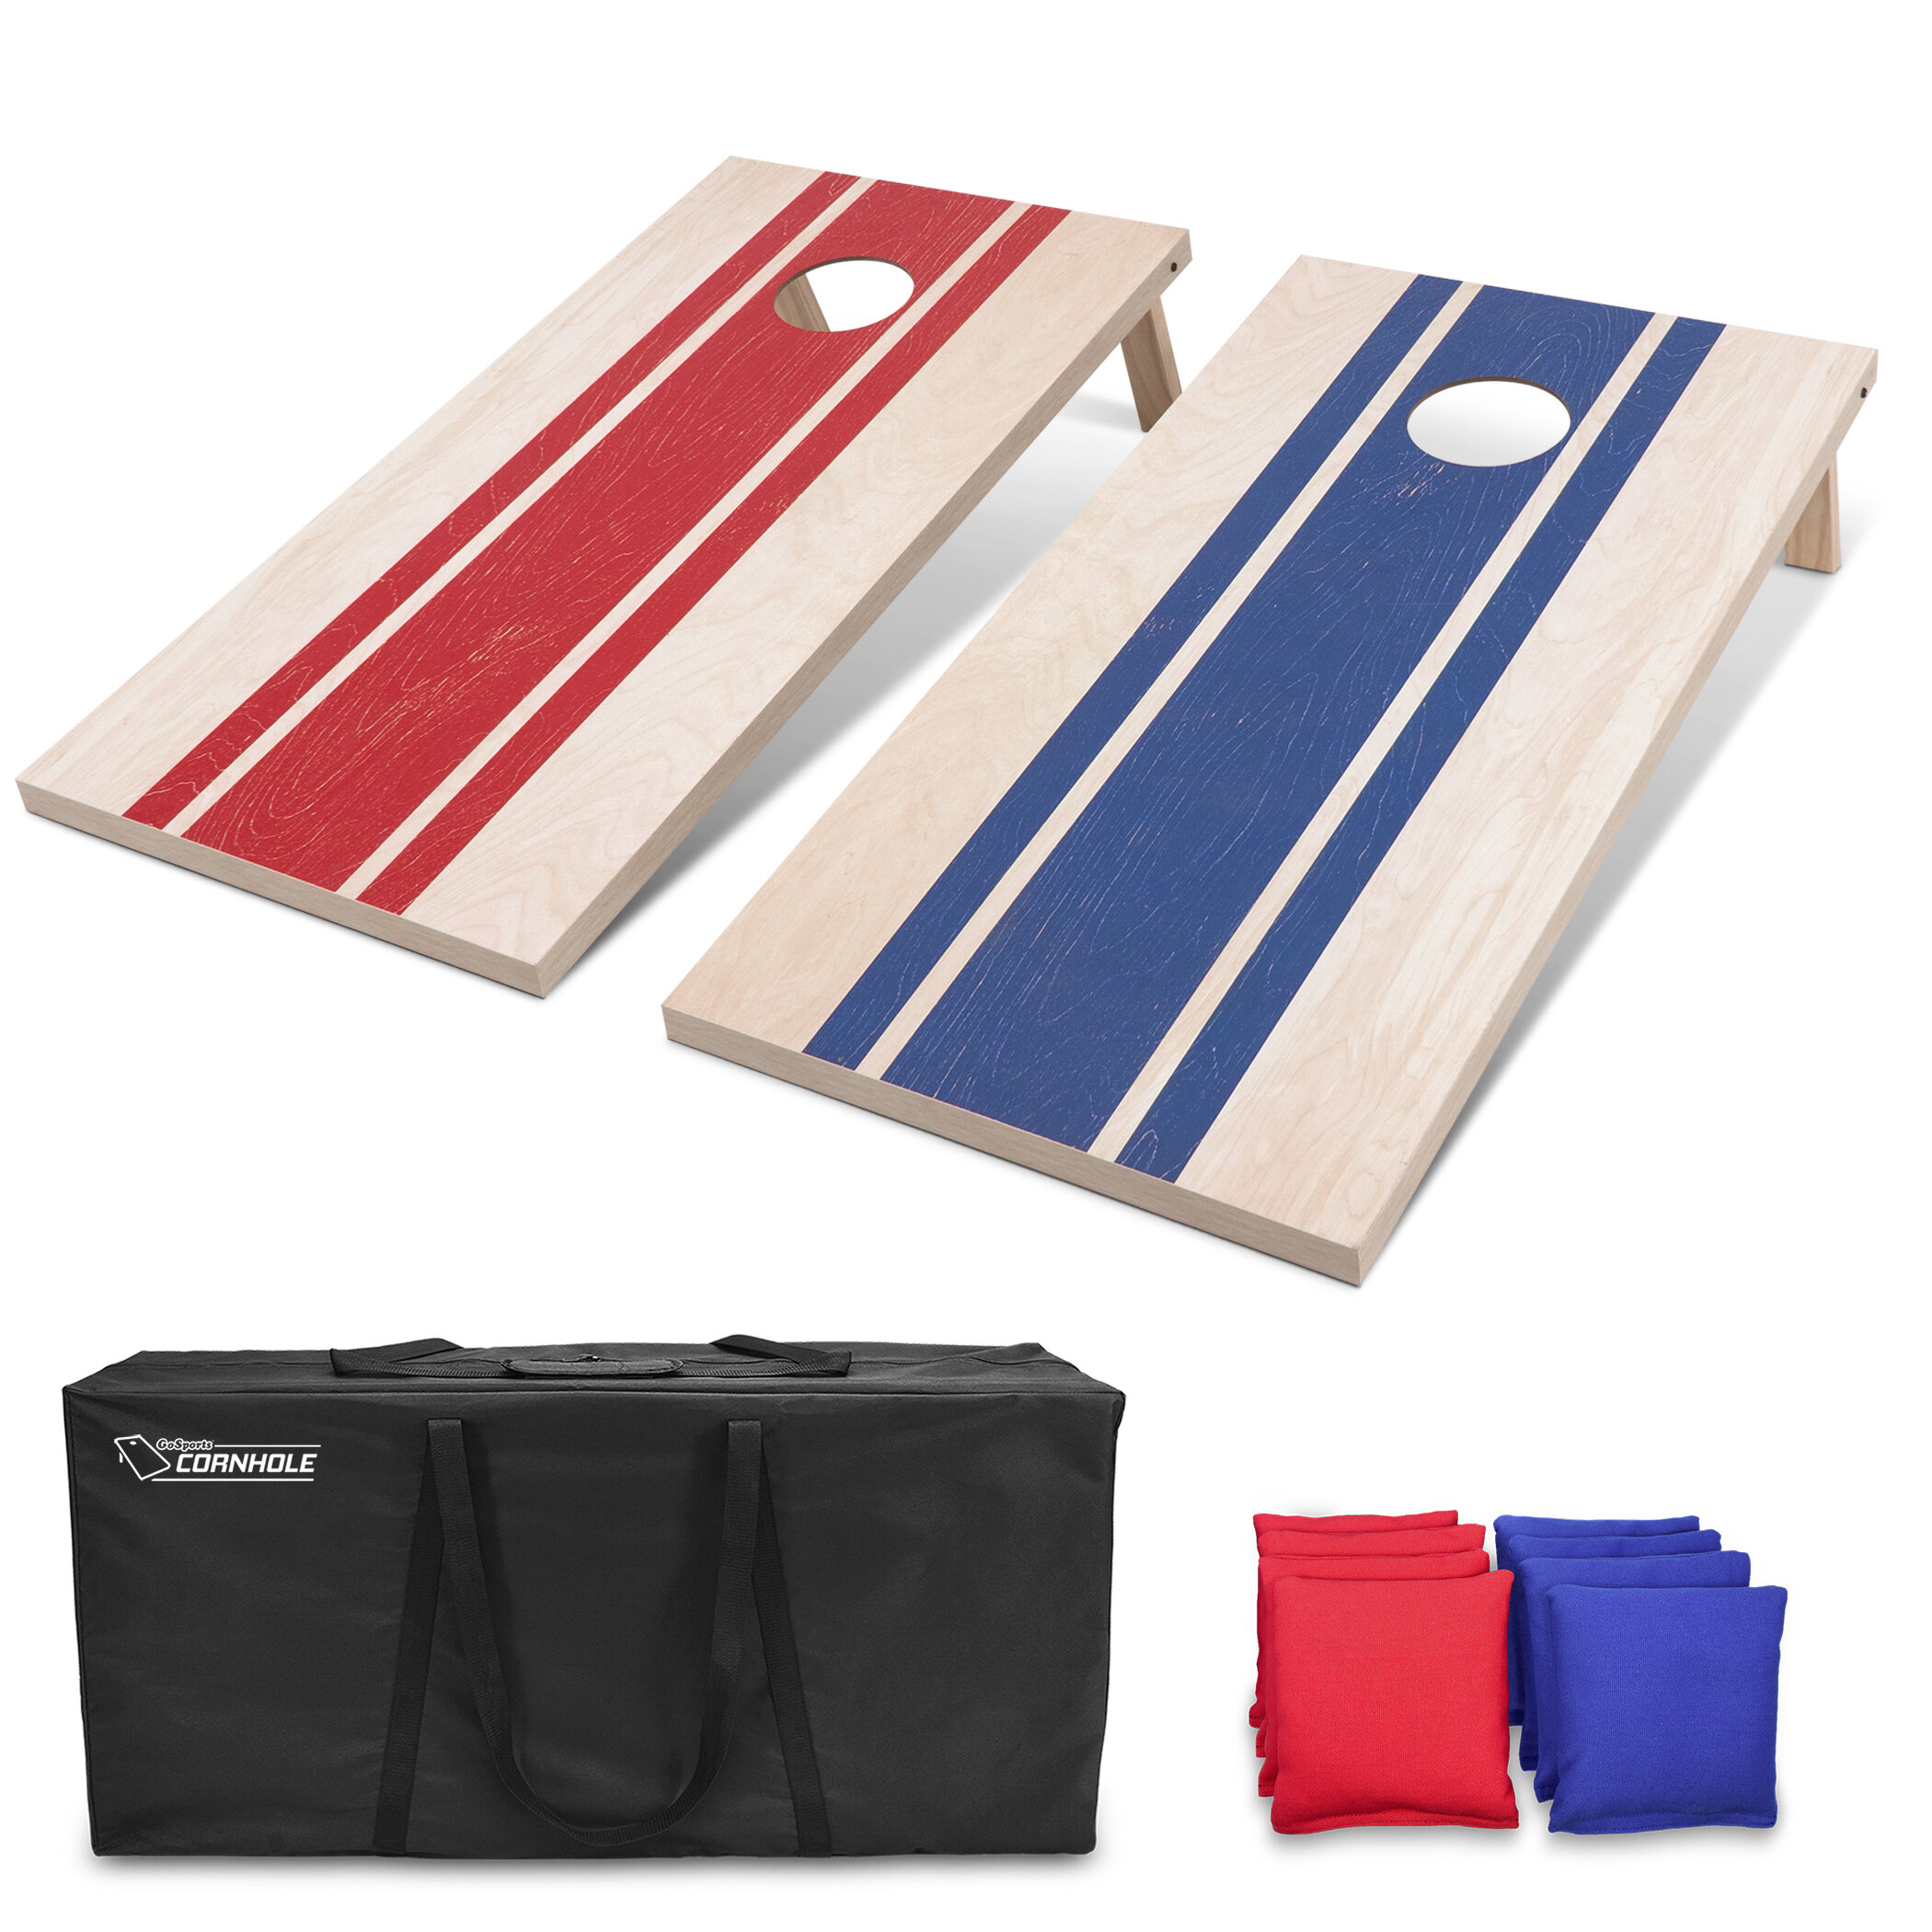 2 Sets Of 8 Regulation Top Quality 21 Colors Cornhole Bean Bags Free Shipping 